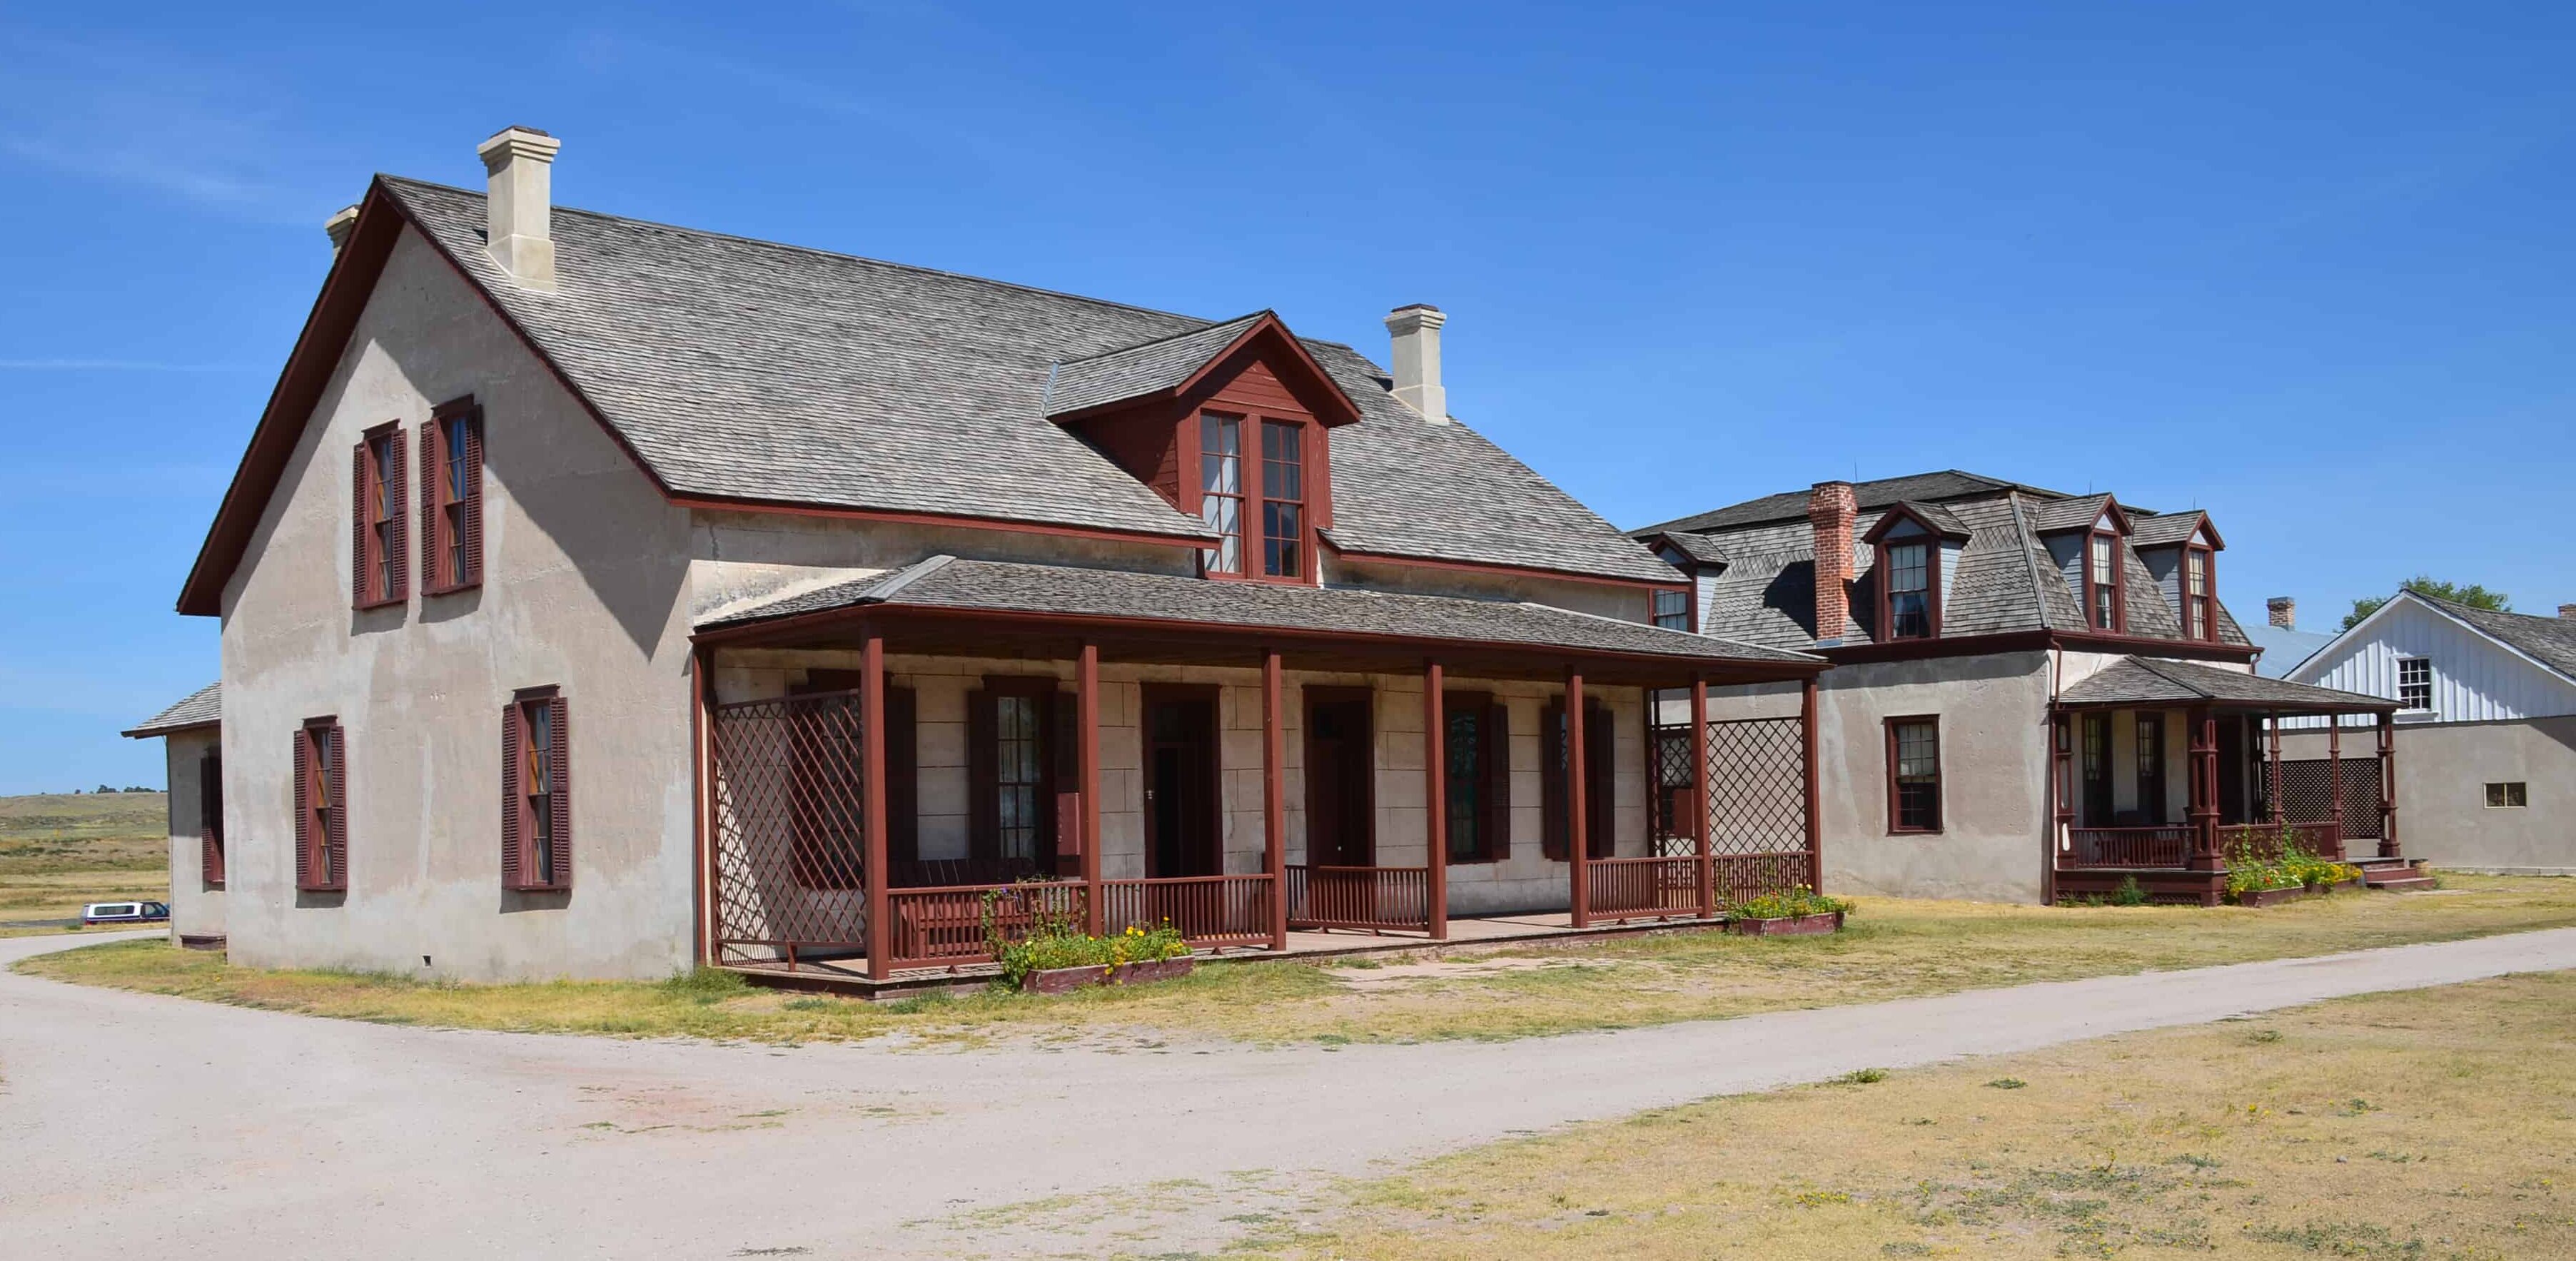 Post surgeon's quarters (left) and lieutenant colonel's quarters (right) at Fort Laramie National Historic Site in Wyoming